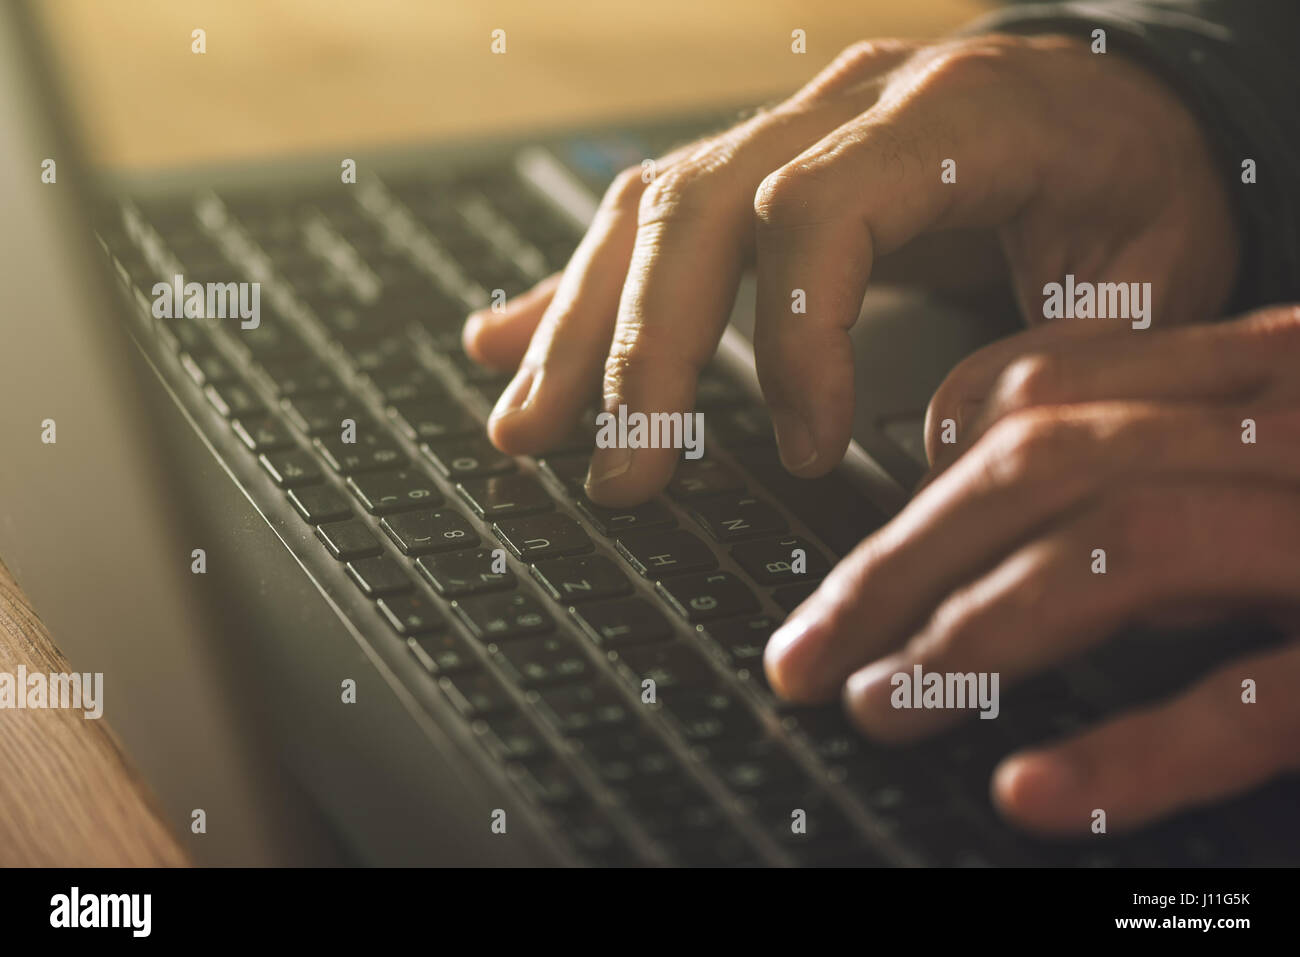 Computer programmer and hacker hands typing laptop keyboard, close up low key with selective focus Stock Photo